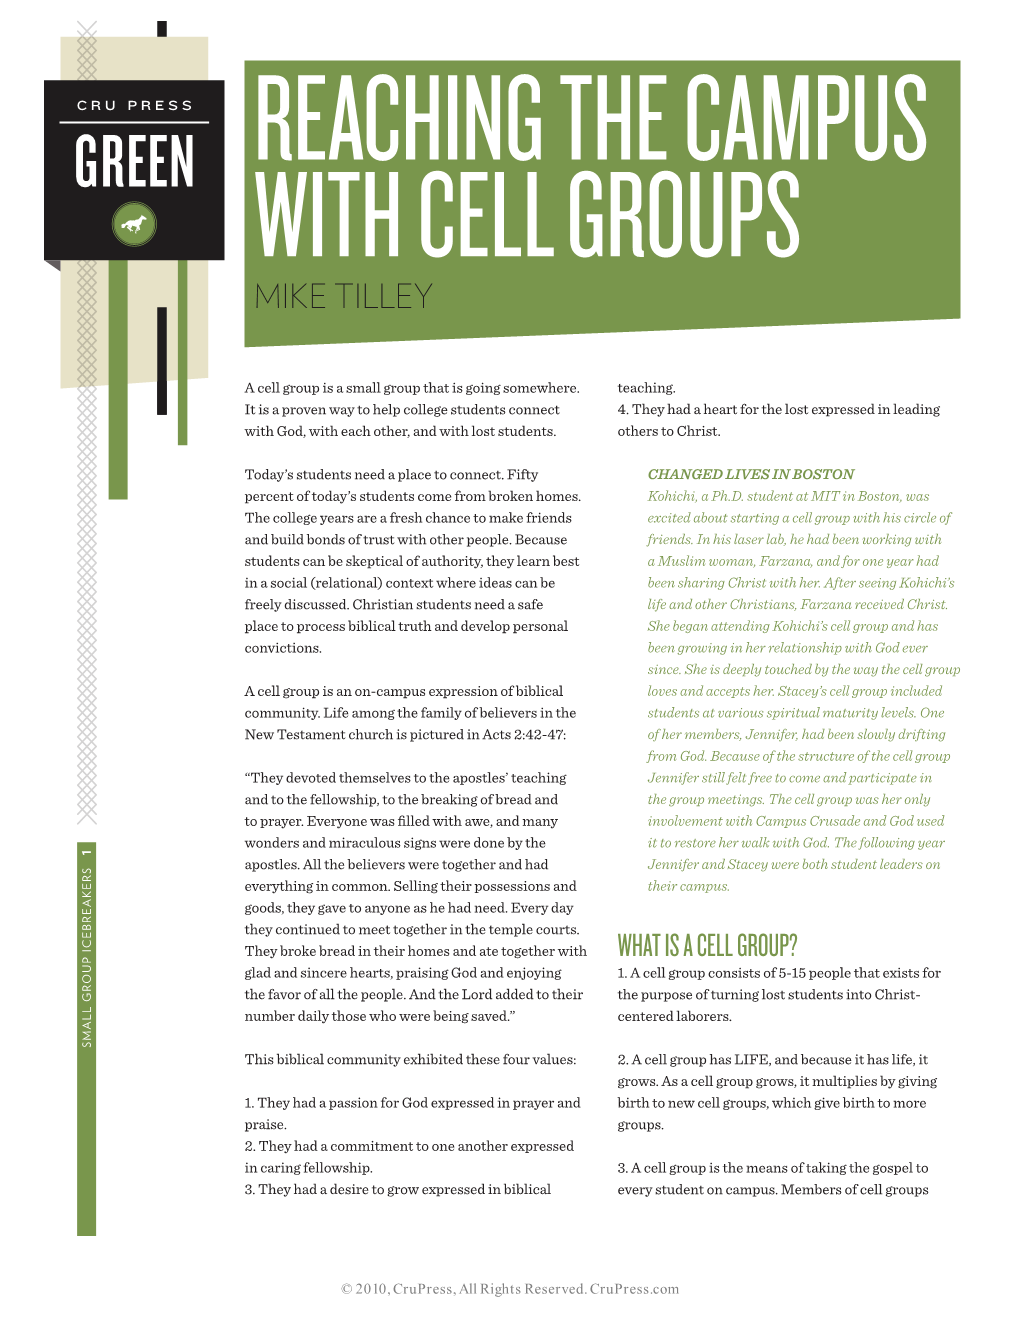 Mike Tilley What Is a Cell Group?